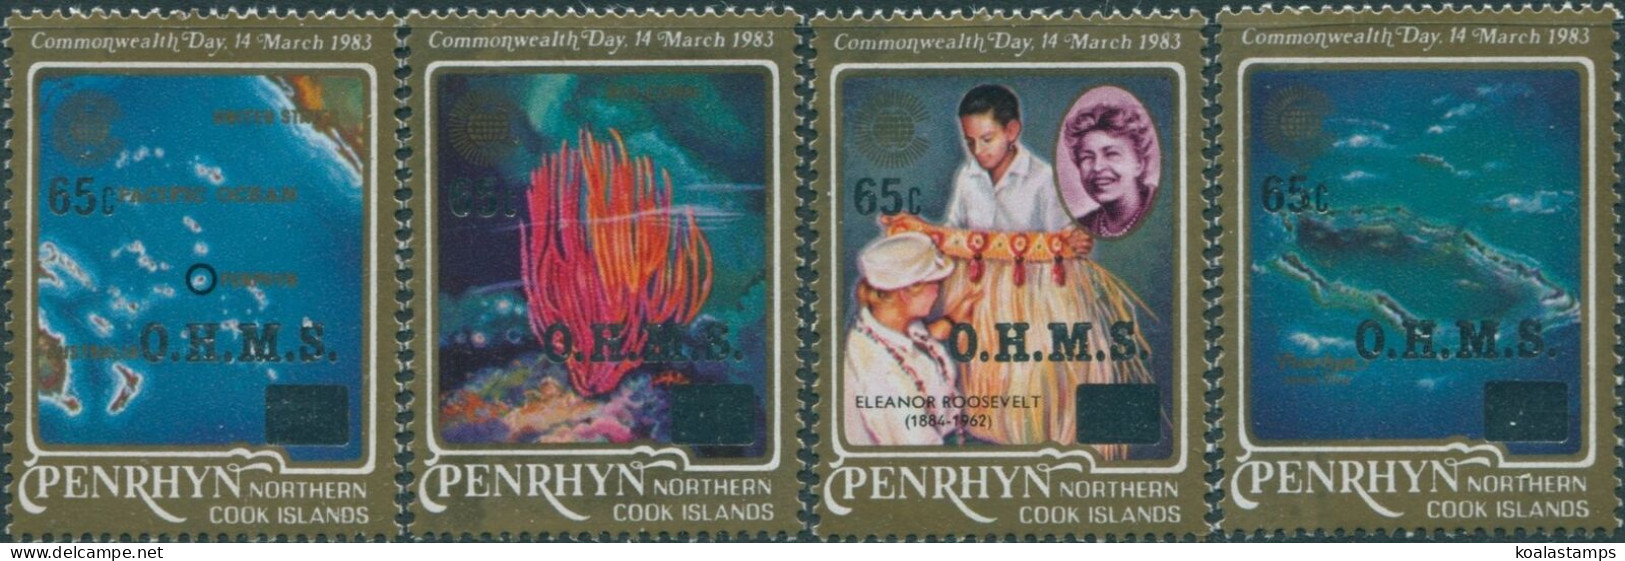 Cook Islands Penrhyn OHMS 1985 SGO39-O42 Commonwealth Day Surcharges Set MNH - Penrhyn